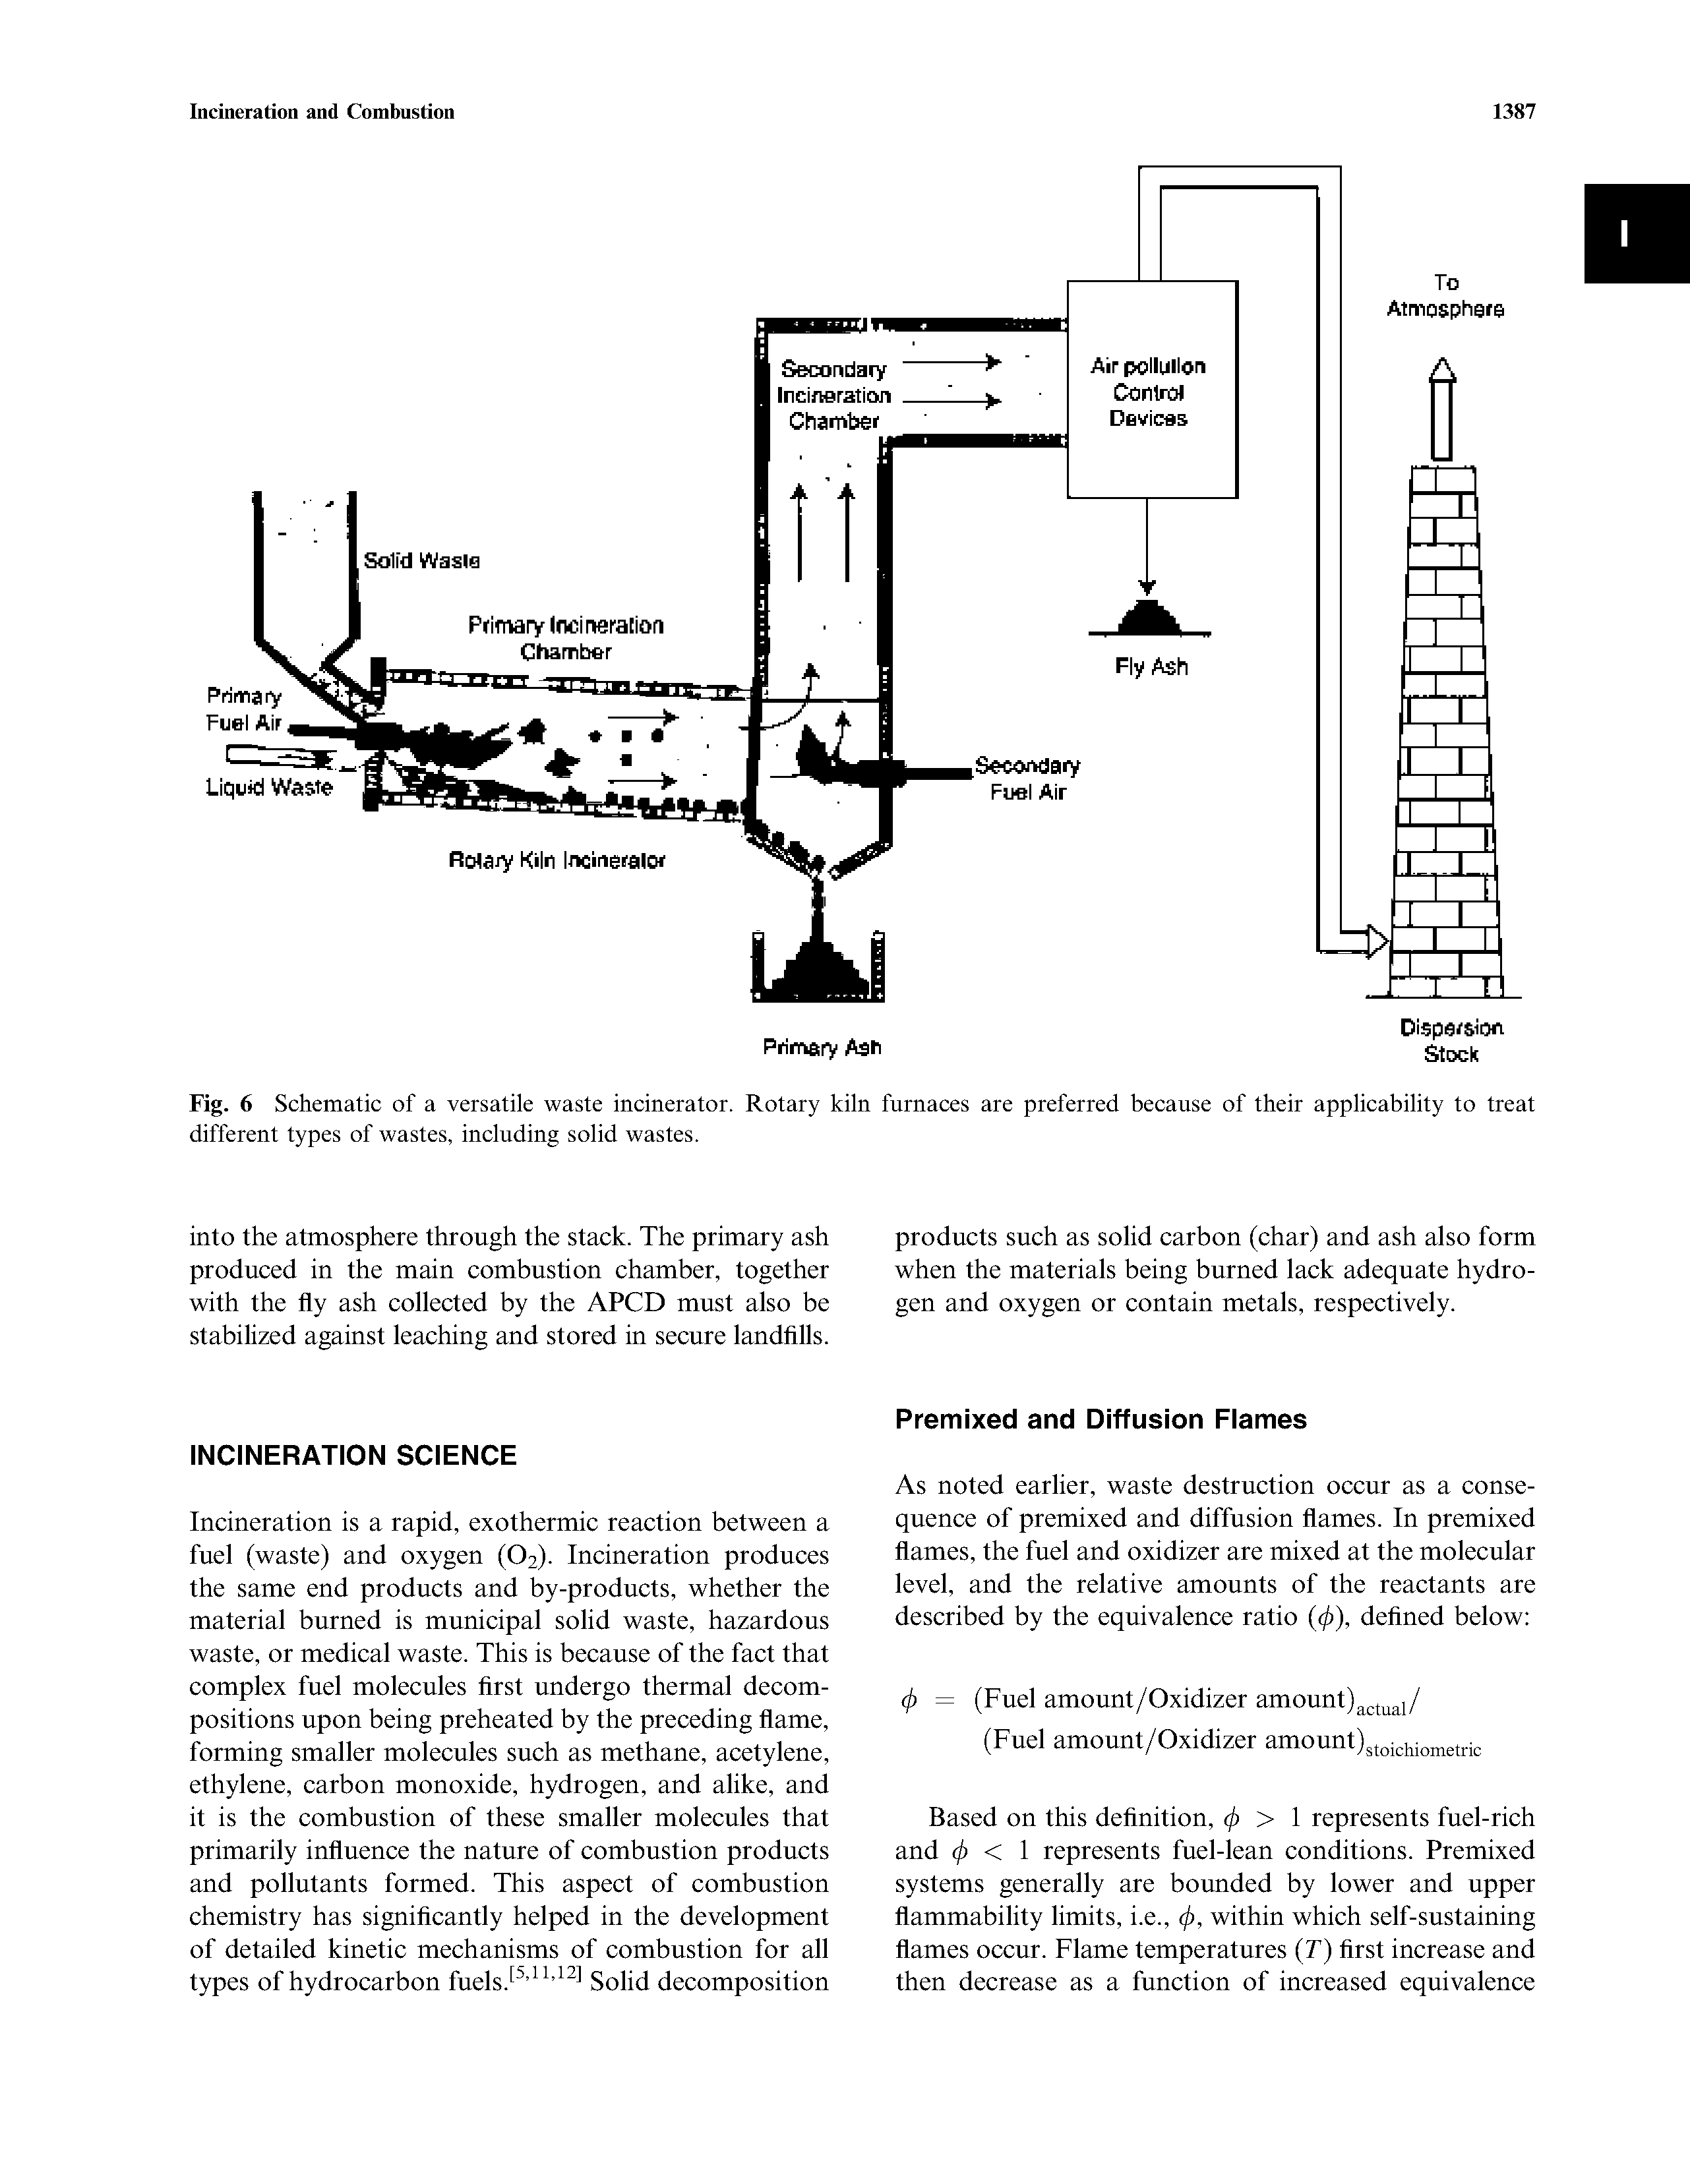 Fig. 6 Schematic of a versatile waste incinerator. Rotary kiln furnaces are preferred because of their applicability to treat different types of wastes, including solid wastes.